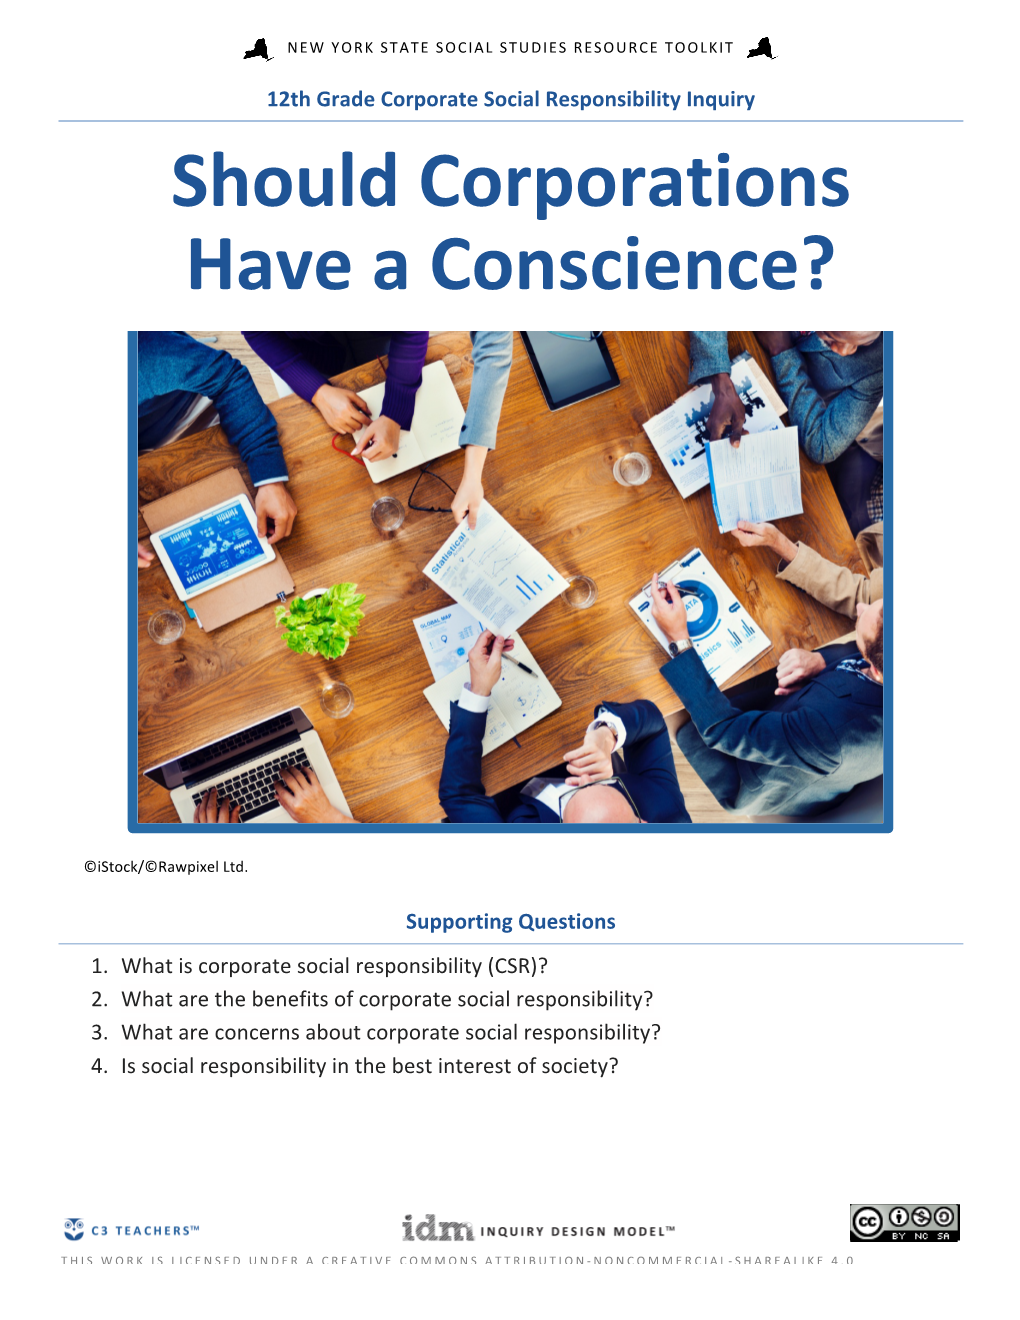 Should Corporations Have a Conscience?